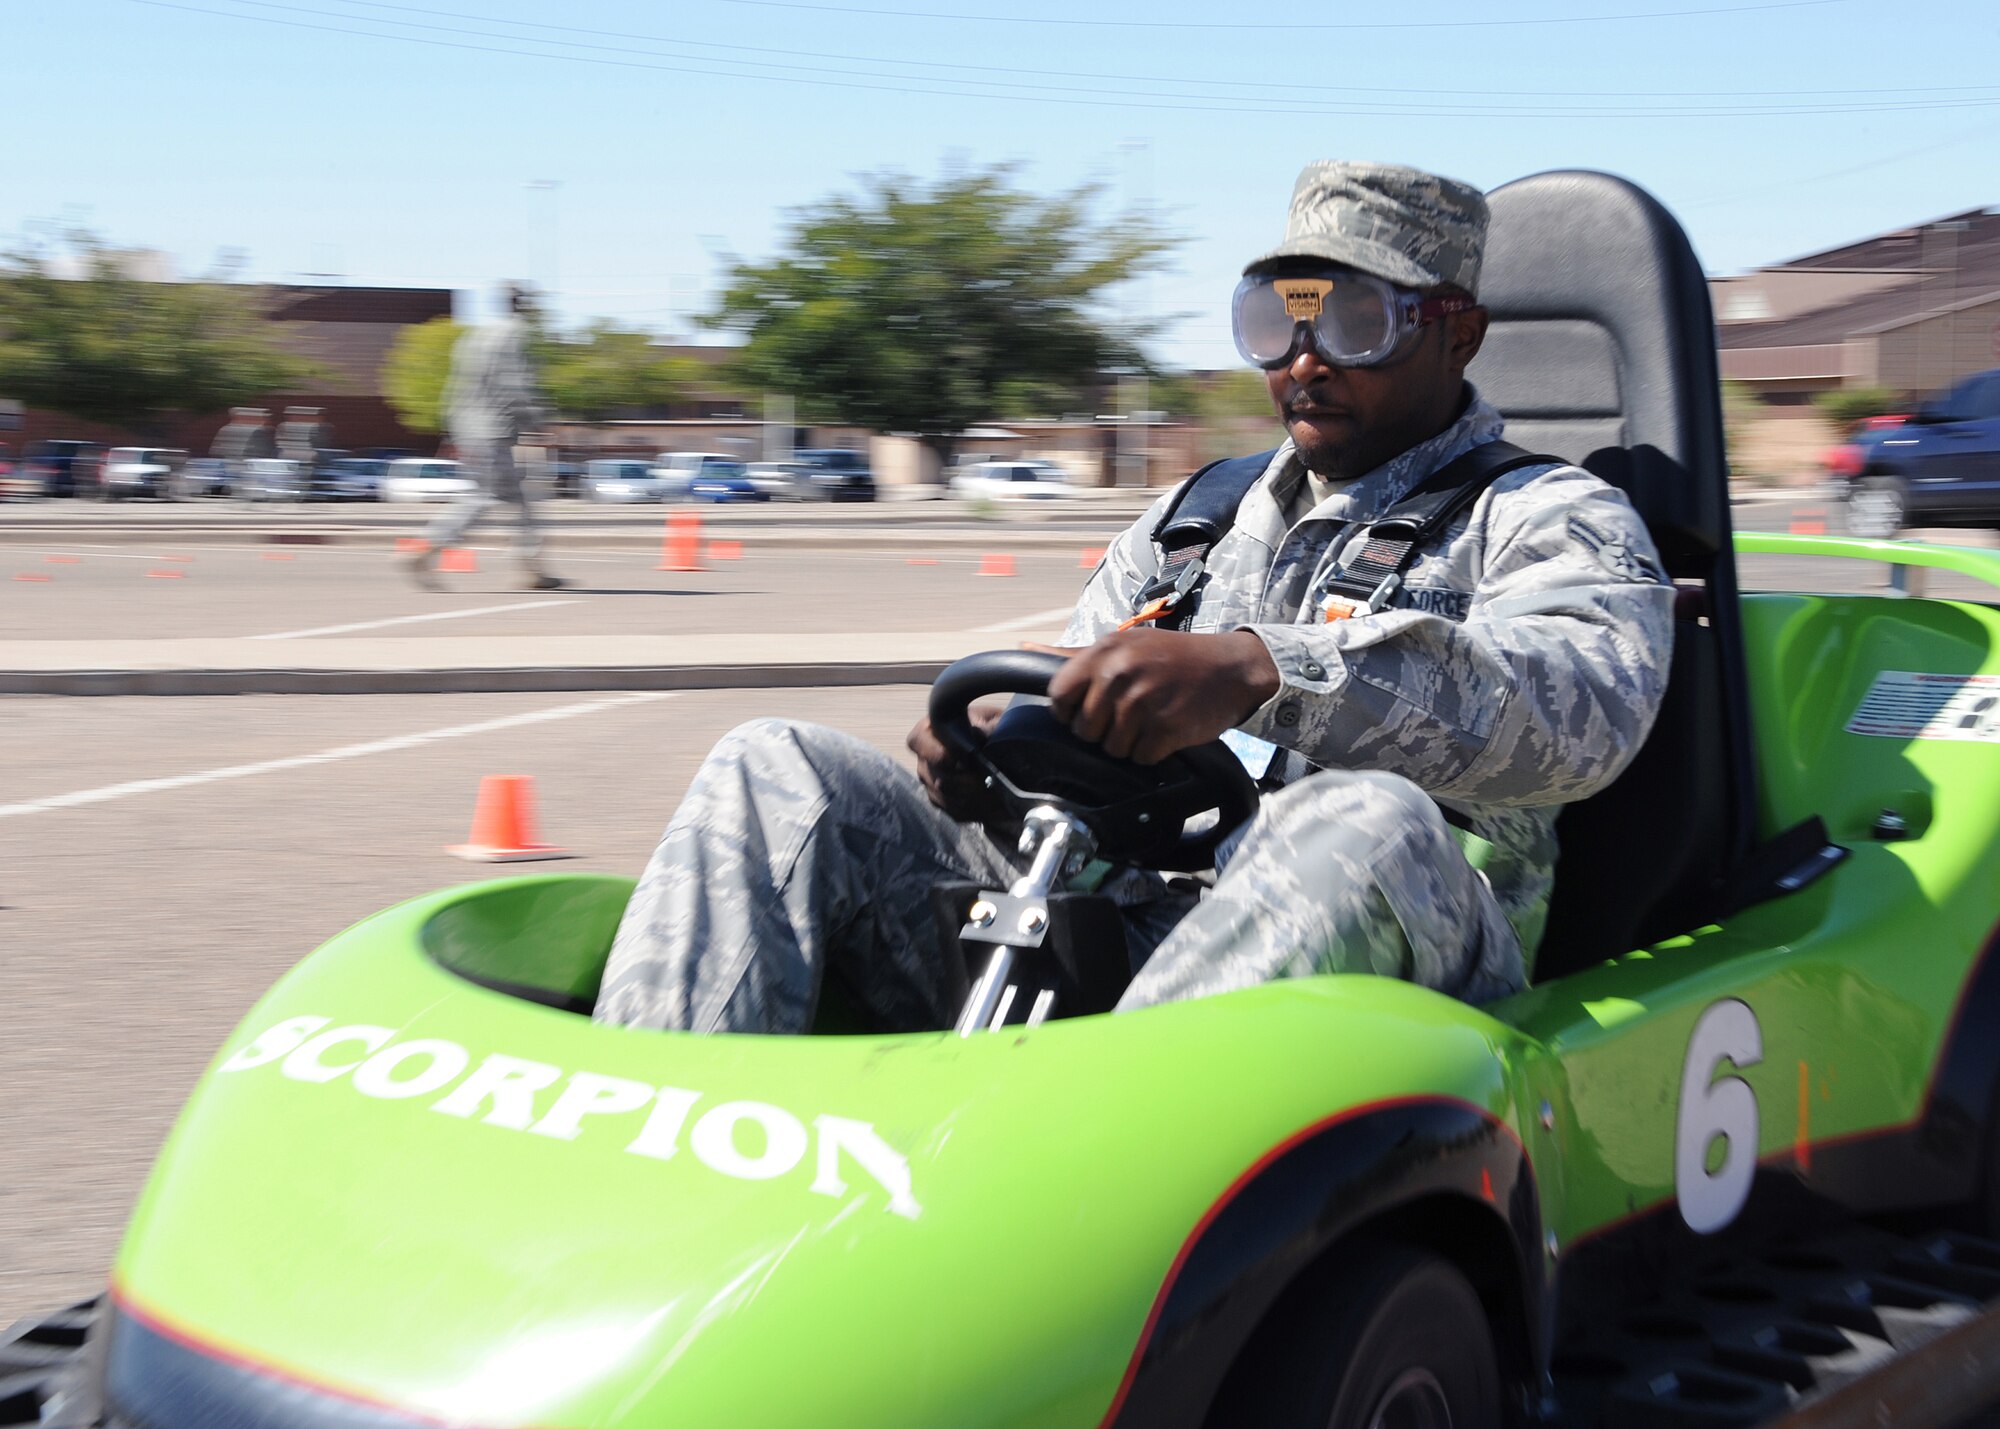 HOLLOMAN AIR FORCE BASE, N.M. -- Airman 1st Class Keith Rivers, 49th Communications Squadron, drives on an obstacle course while wearing the "drunken vision" goggles during Safety Day here Sept. 28. About 350 volunteers took part in a one-hour course called "The Danger of Texting While Driving" and "The Danger of Driving While Impaired." These special go-cart-sized cars were rigged to simulate reduced capability so Airmen could experience this without really drinking or texting while driving. (U.S. Air Force photo by Senior Airman John D. Strong II)   